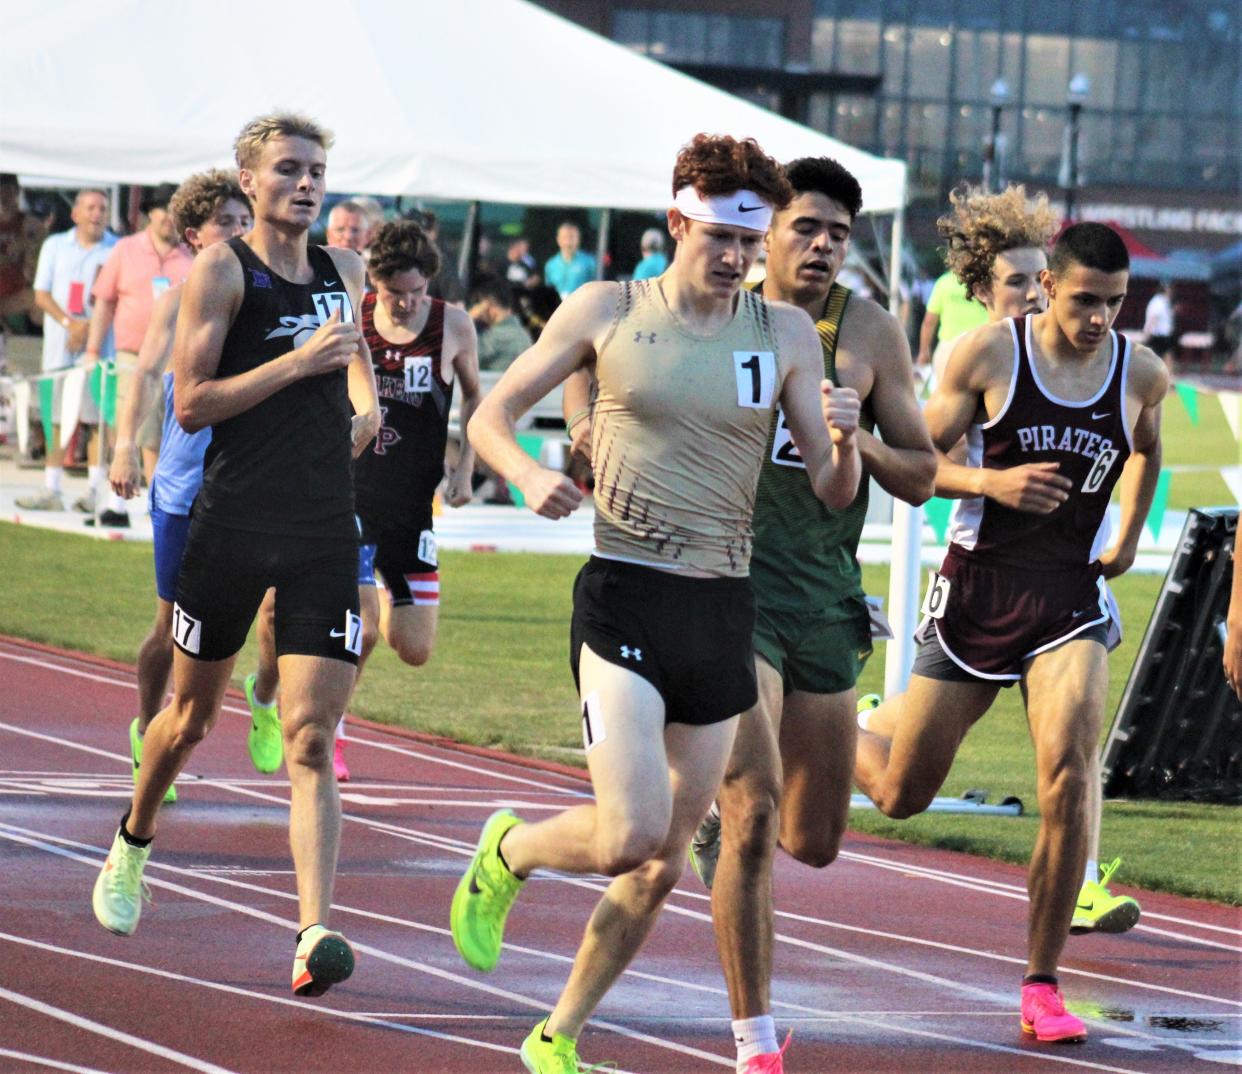 Calvin Kilgallon (1) has a personal best of 1:52.73 in the 800 meters, which happened during his third place finish at the 2023 Division I track and field state championships.